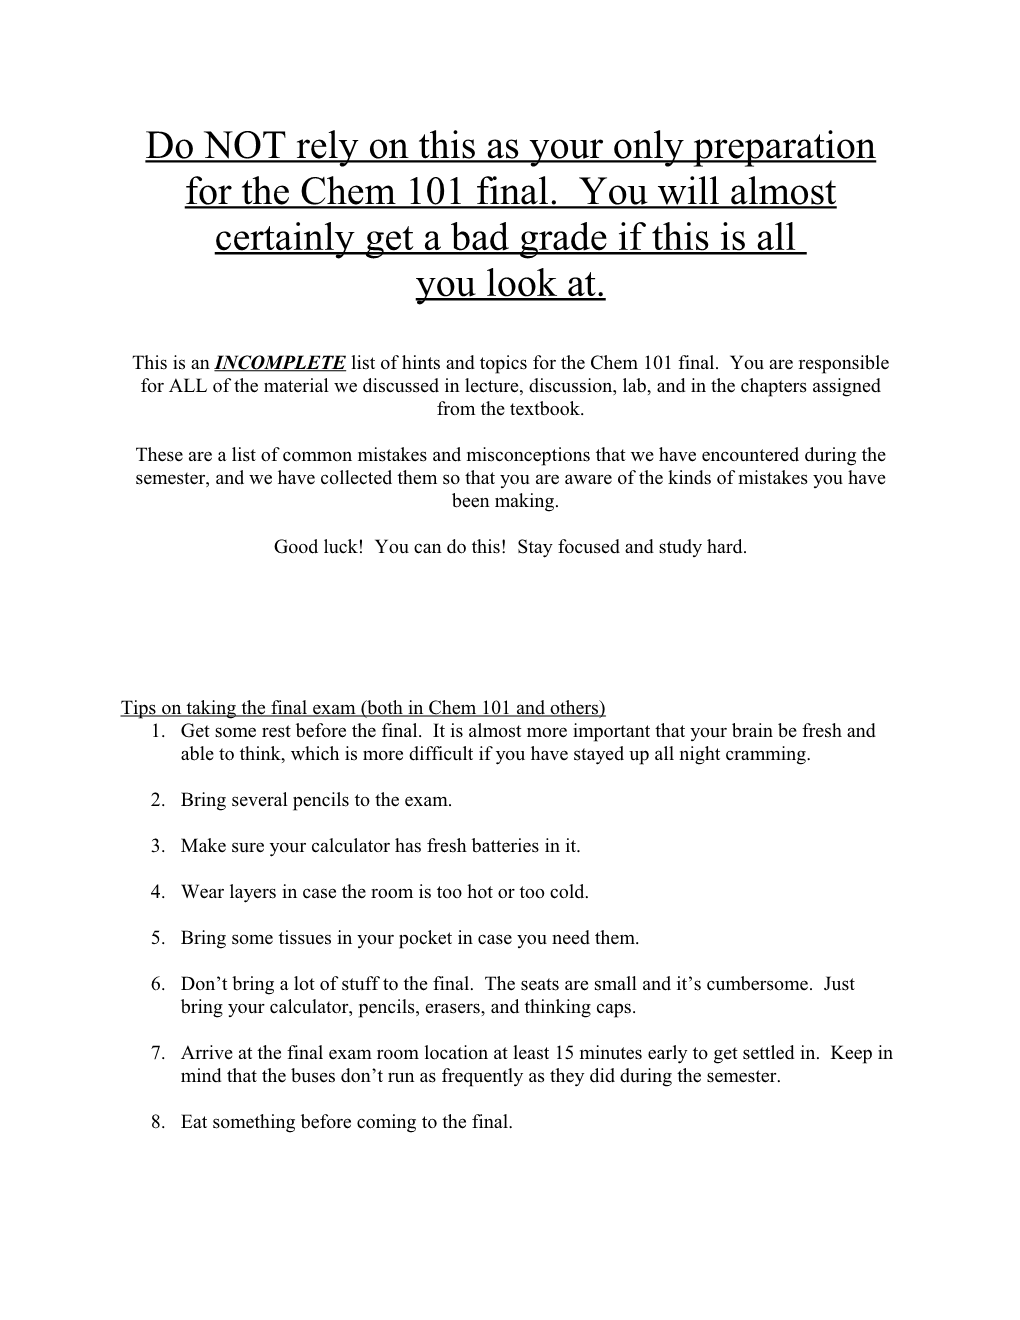 Tips in Preparing for the Chem 101 Final Exam